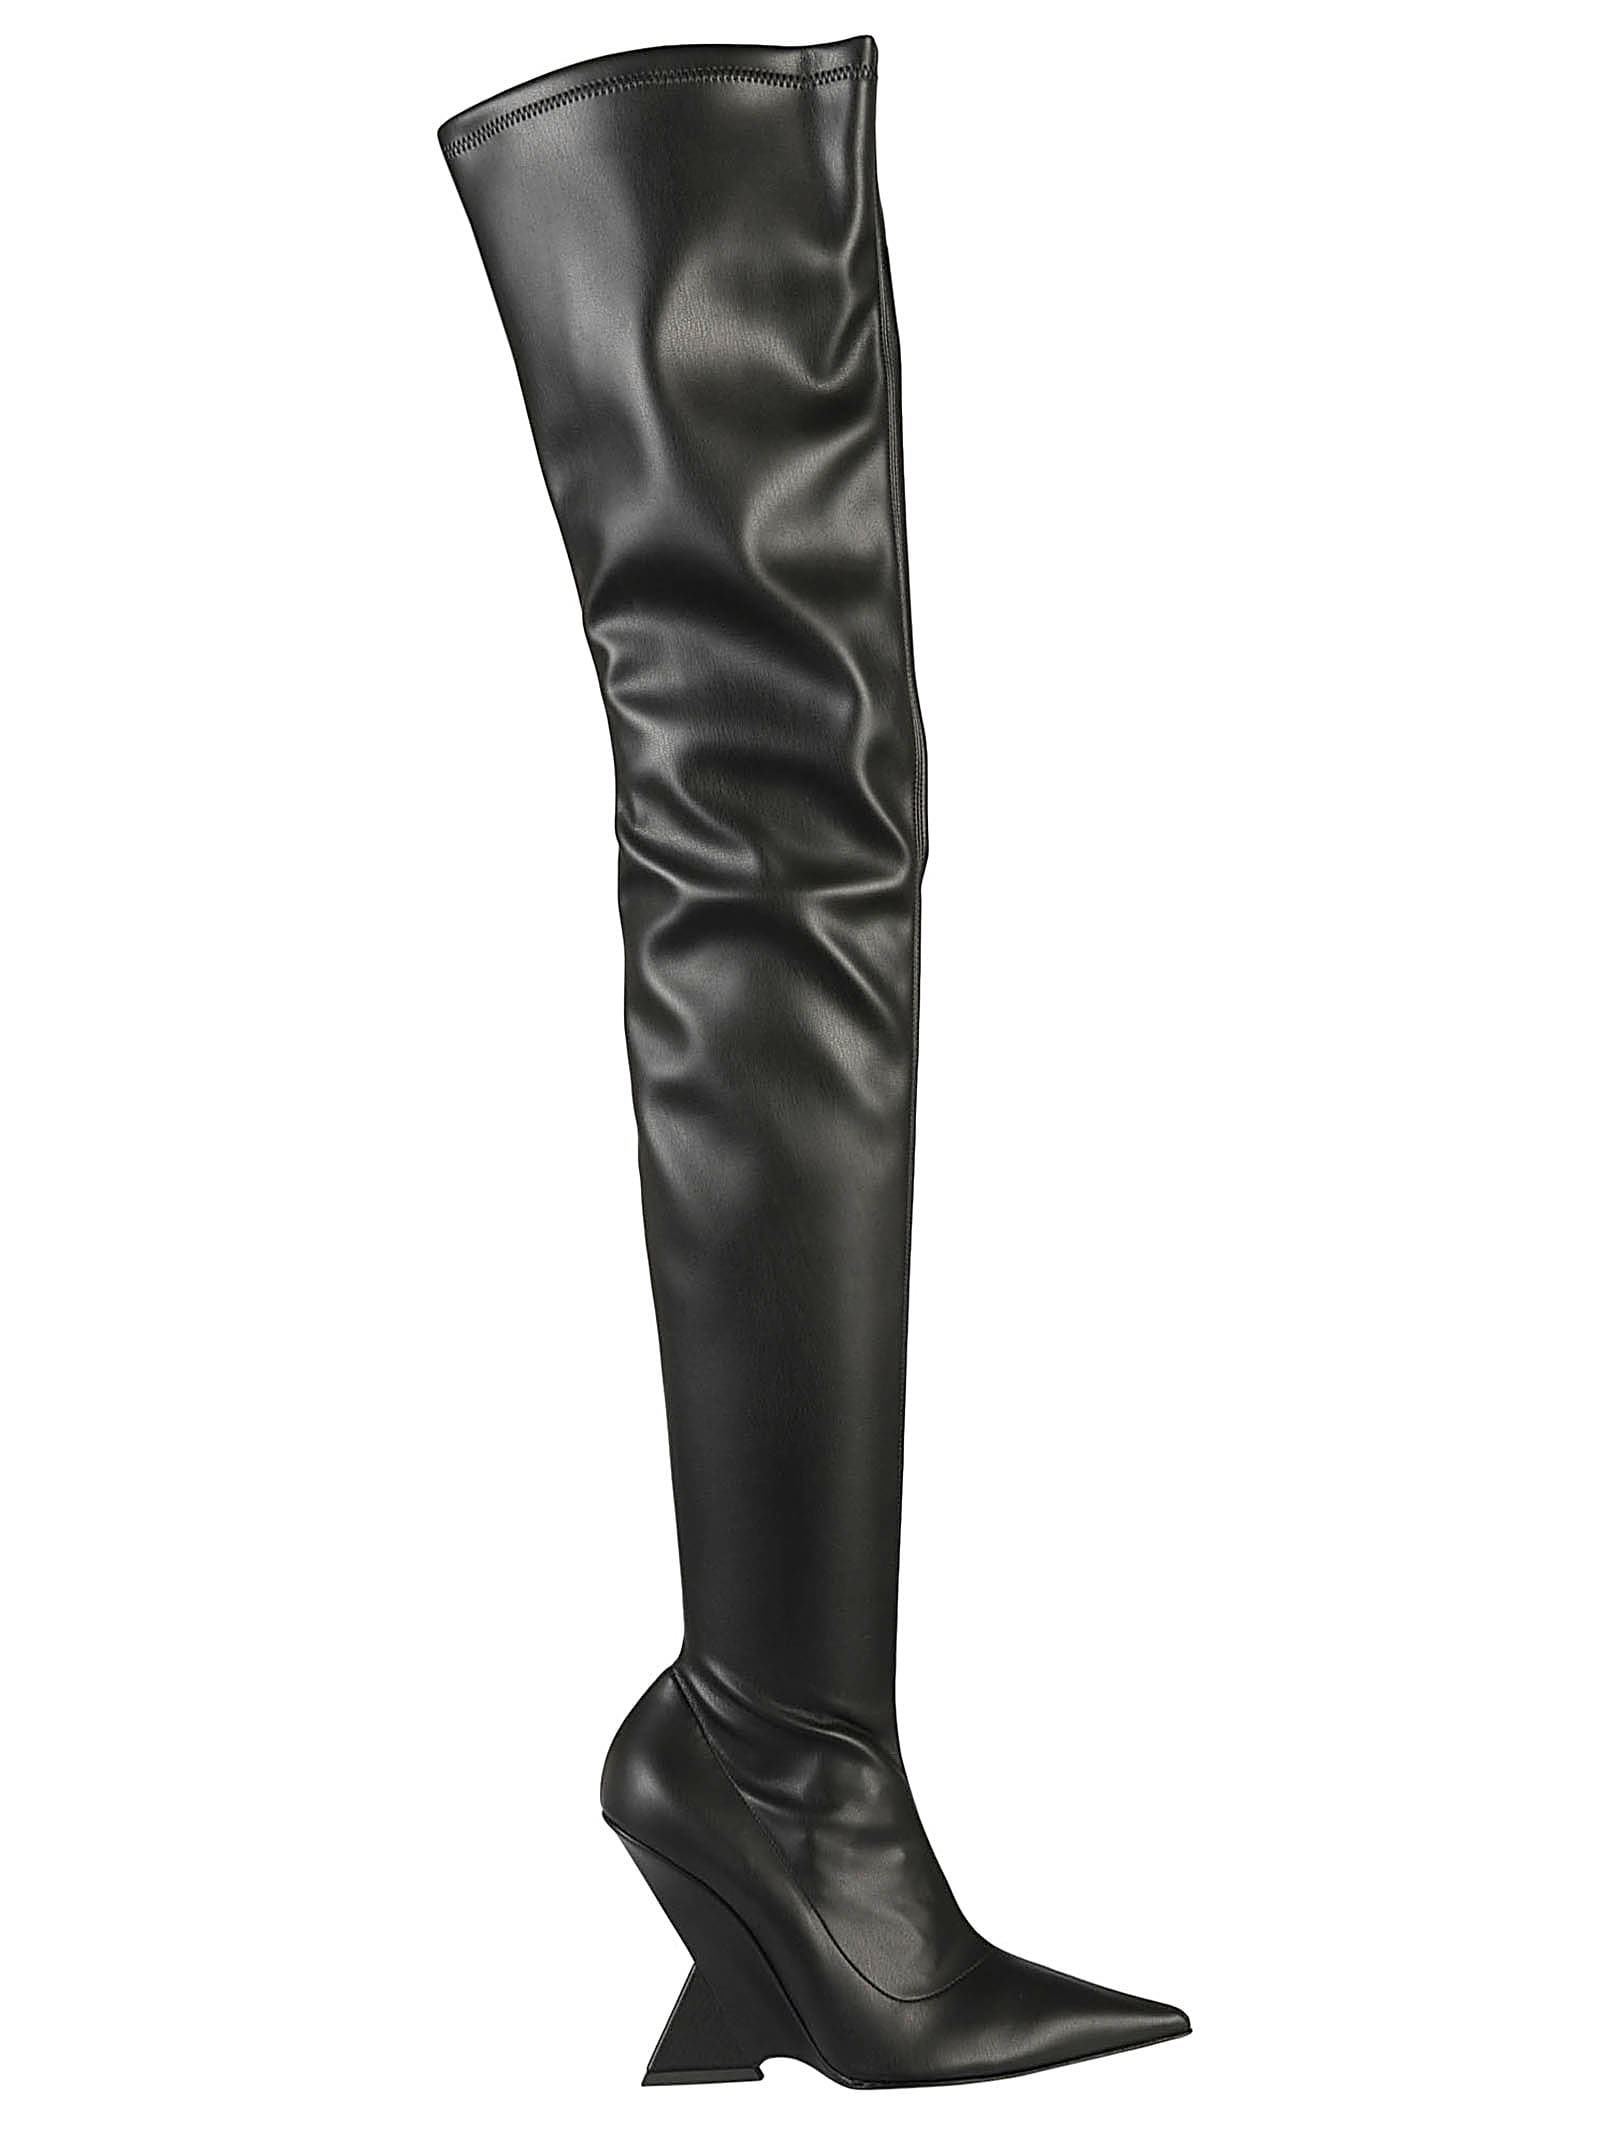 Cheope Over-the-knee Boots